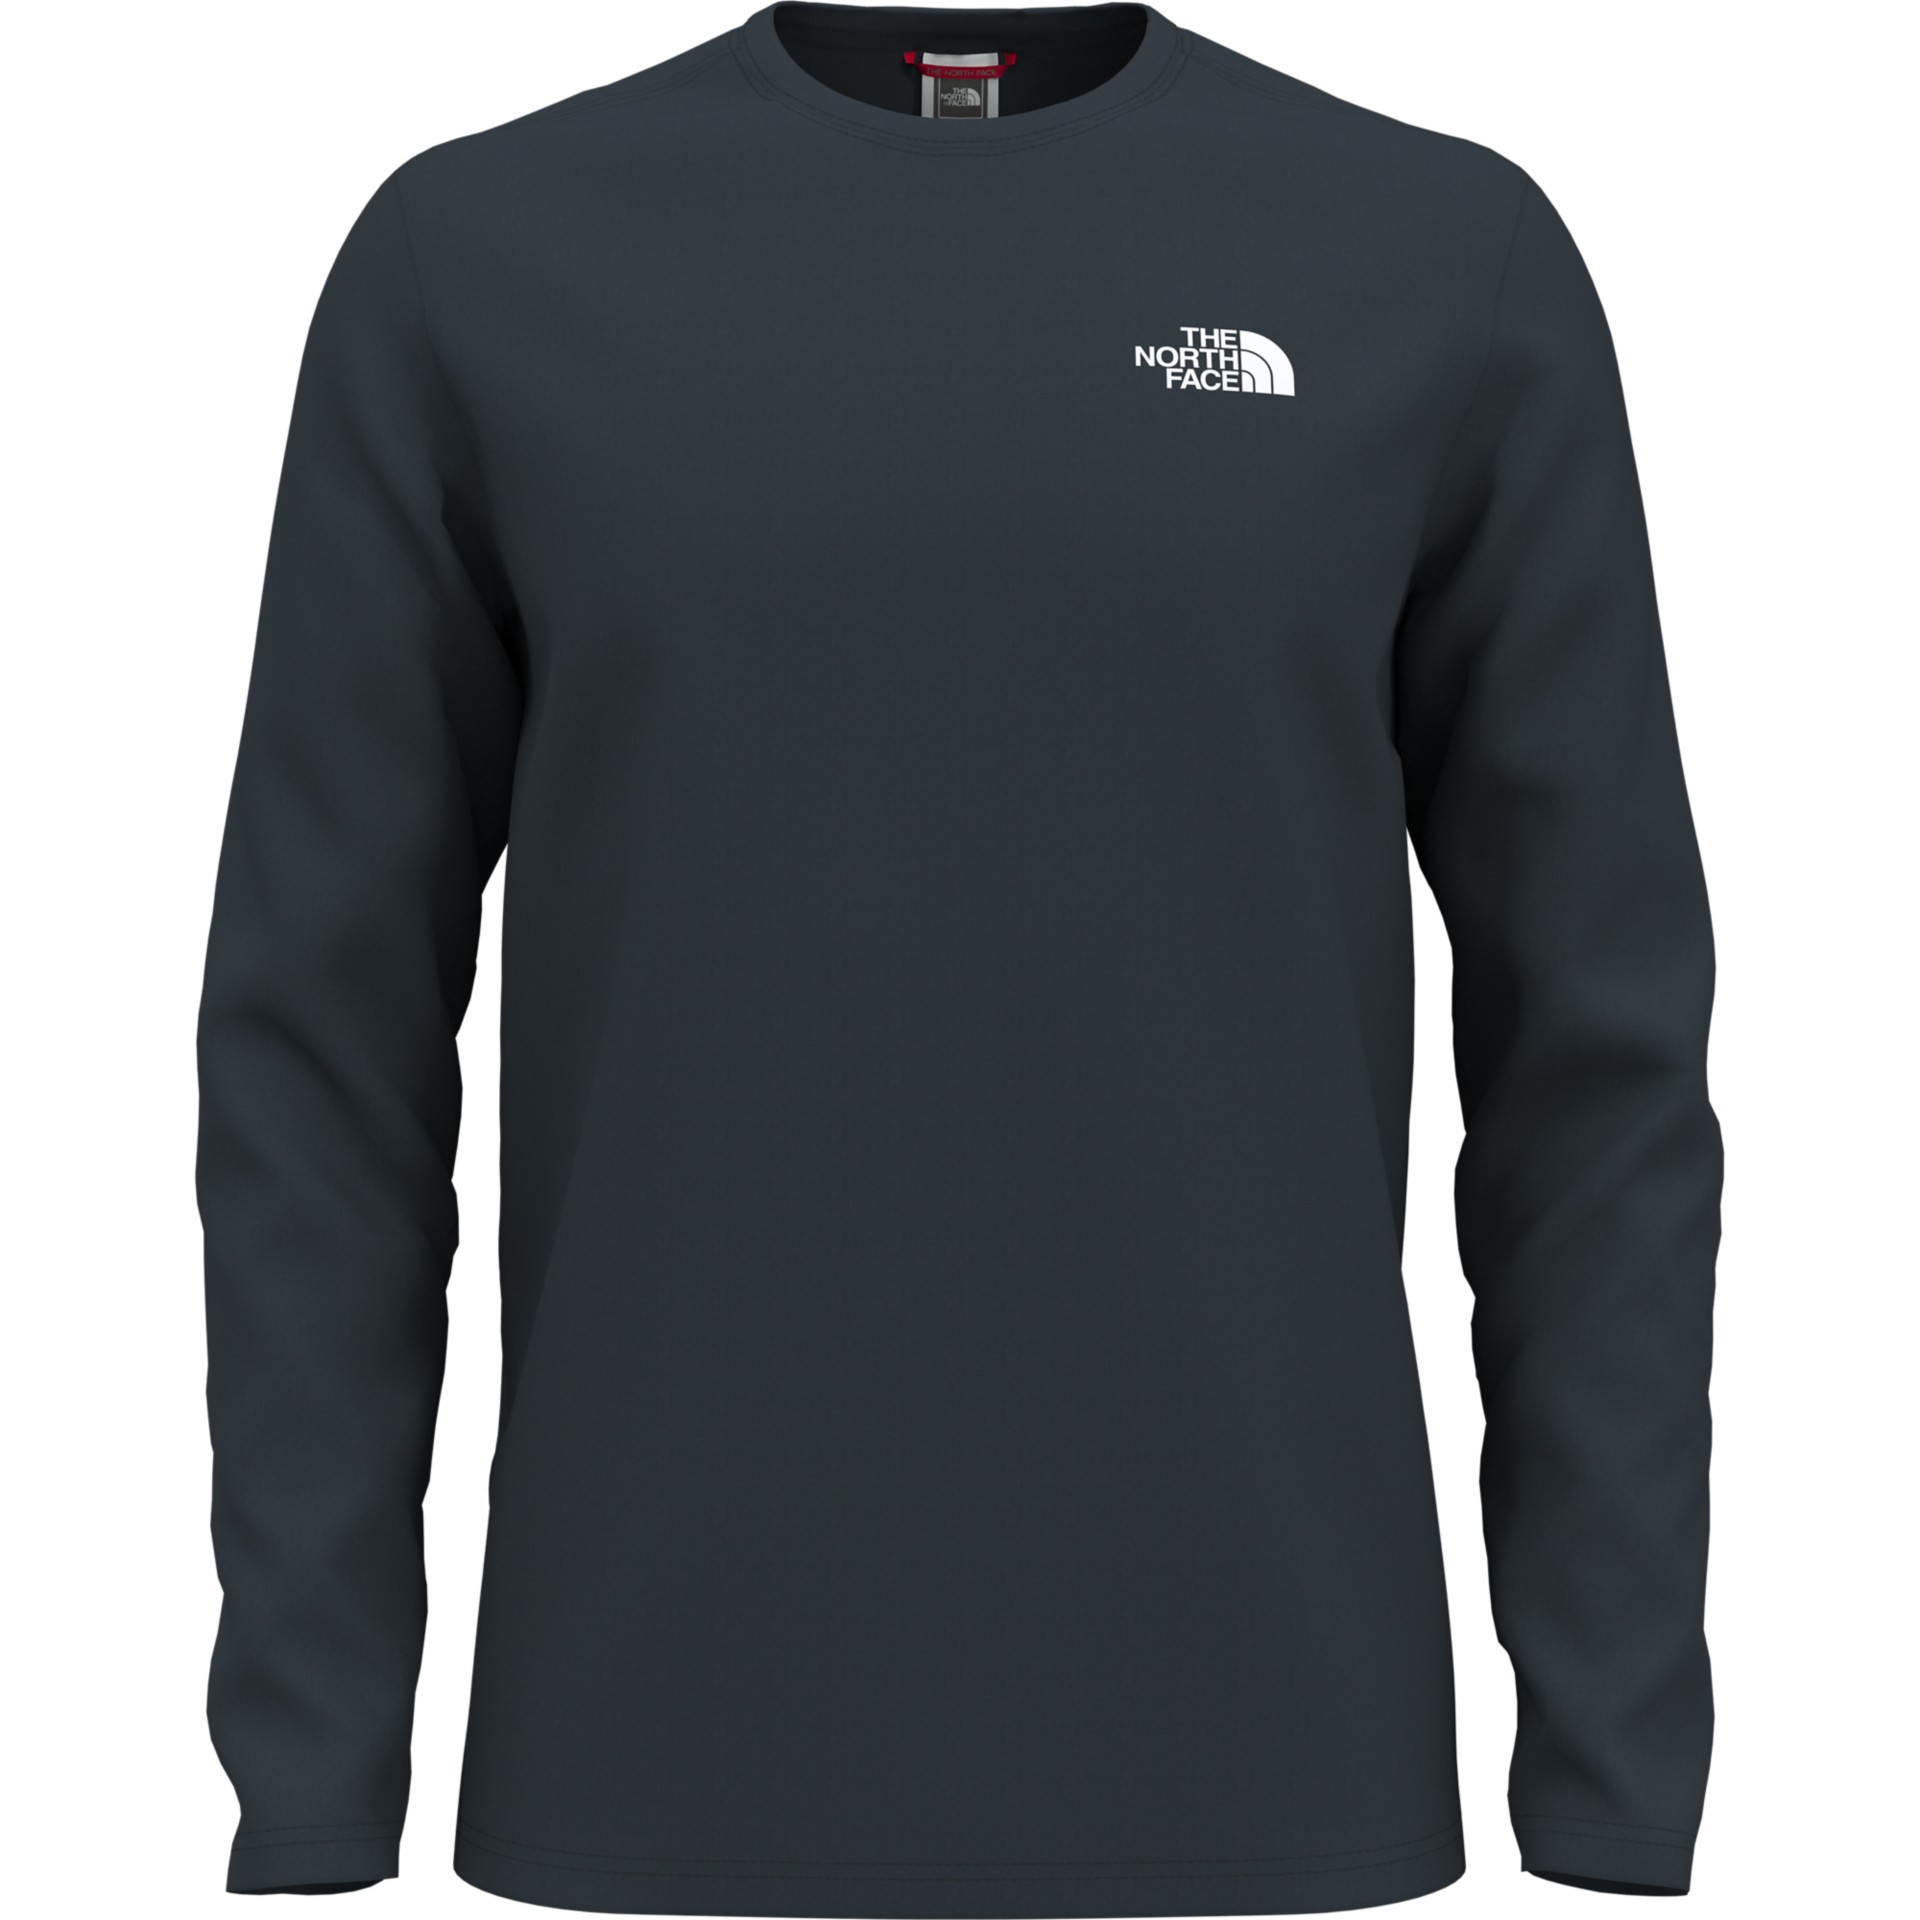 the-north-face-the-north-face-t-shirt-noir-manches-longues